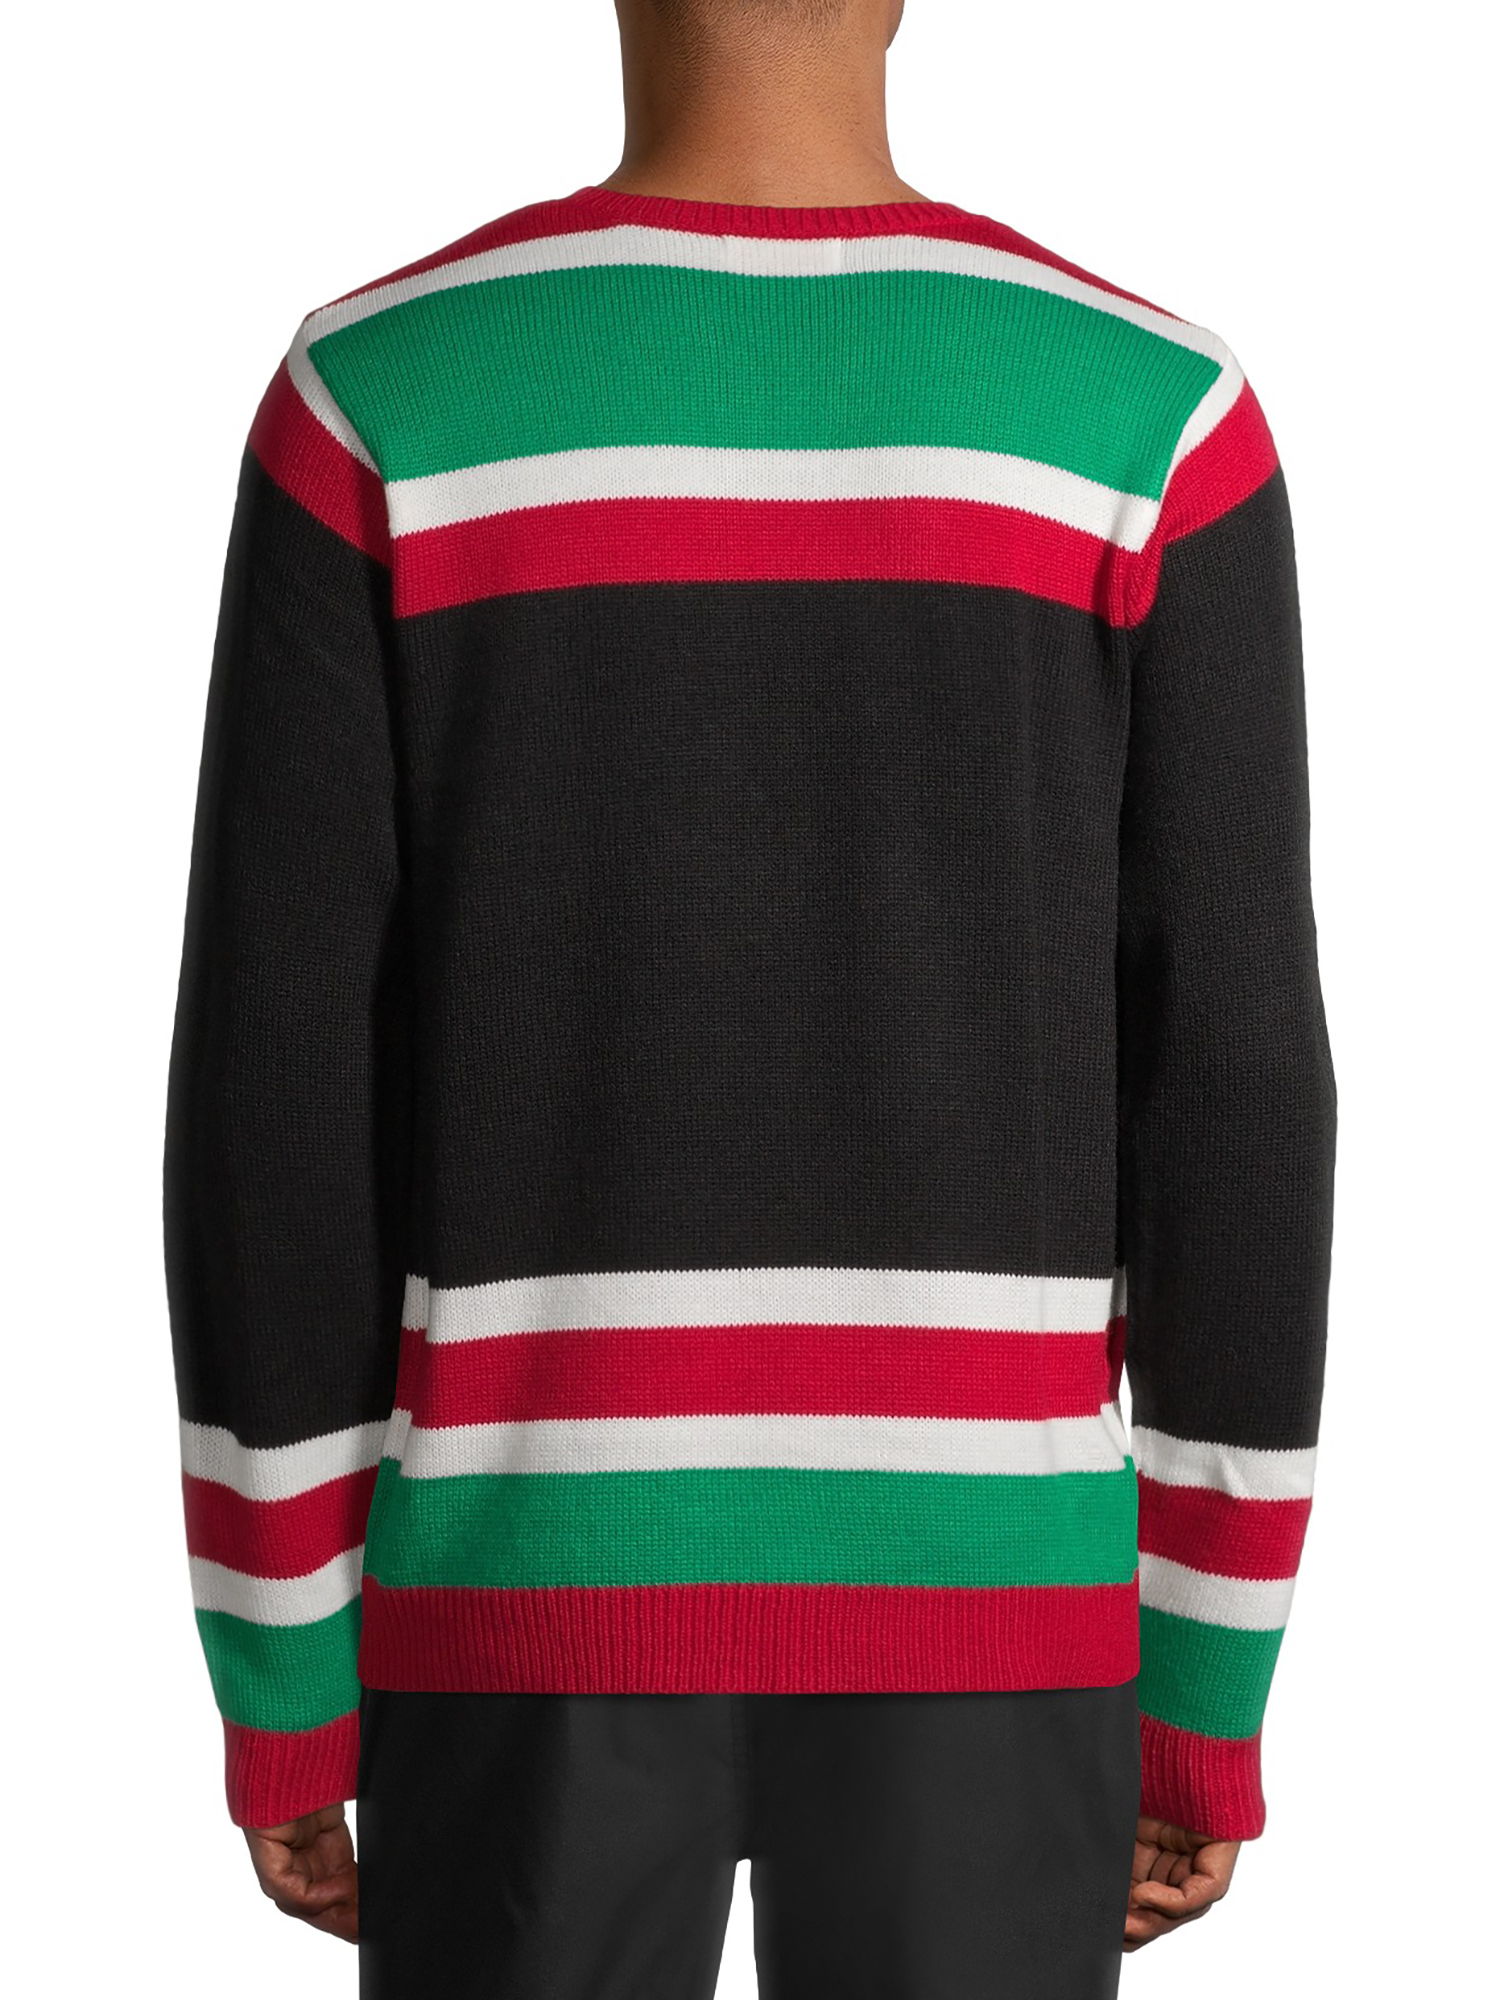 Holiday Time Men's and Big Men's Ugly Christmas Sweater - image 3 of 6